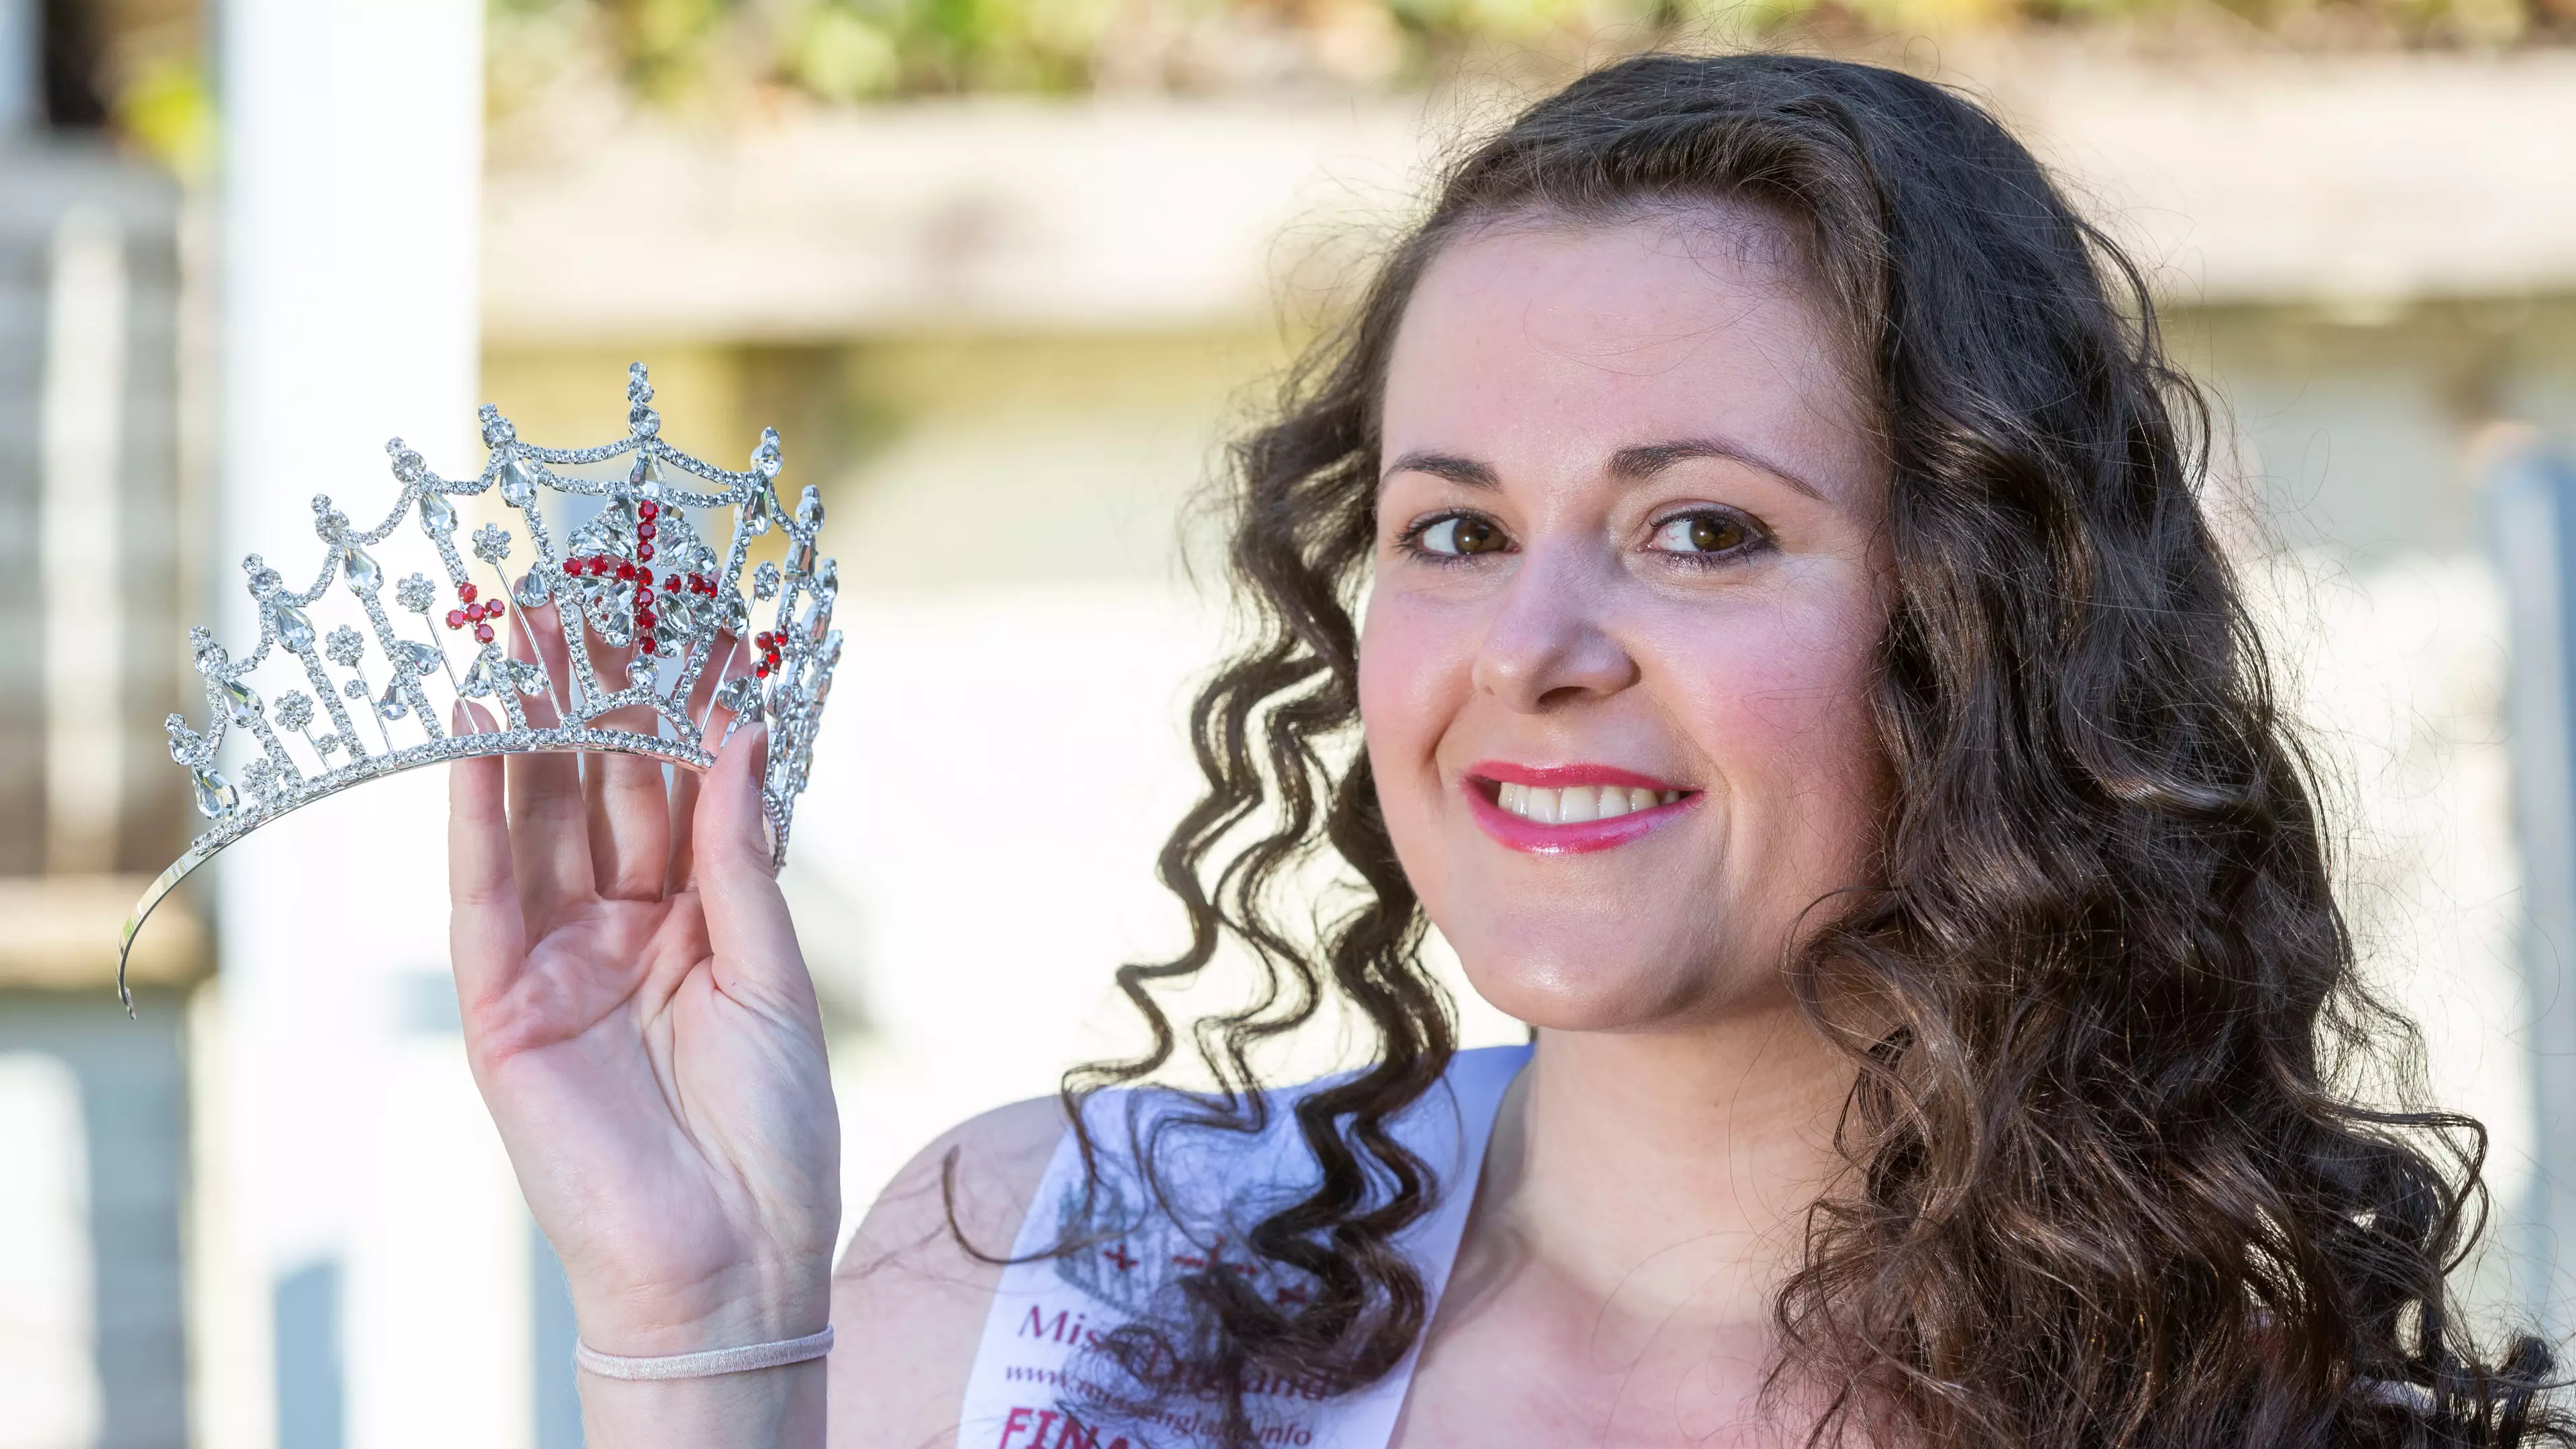 Junior Doctor Becomes Miss England Finalist Despite Never Entering Beauty Pageant Before